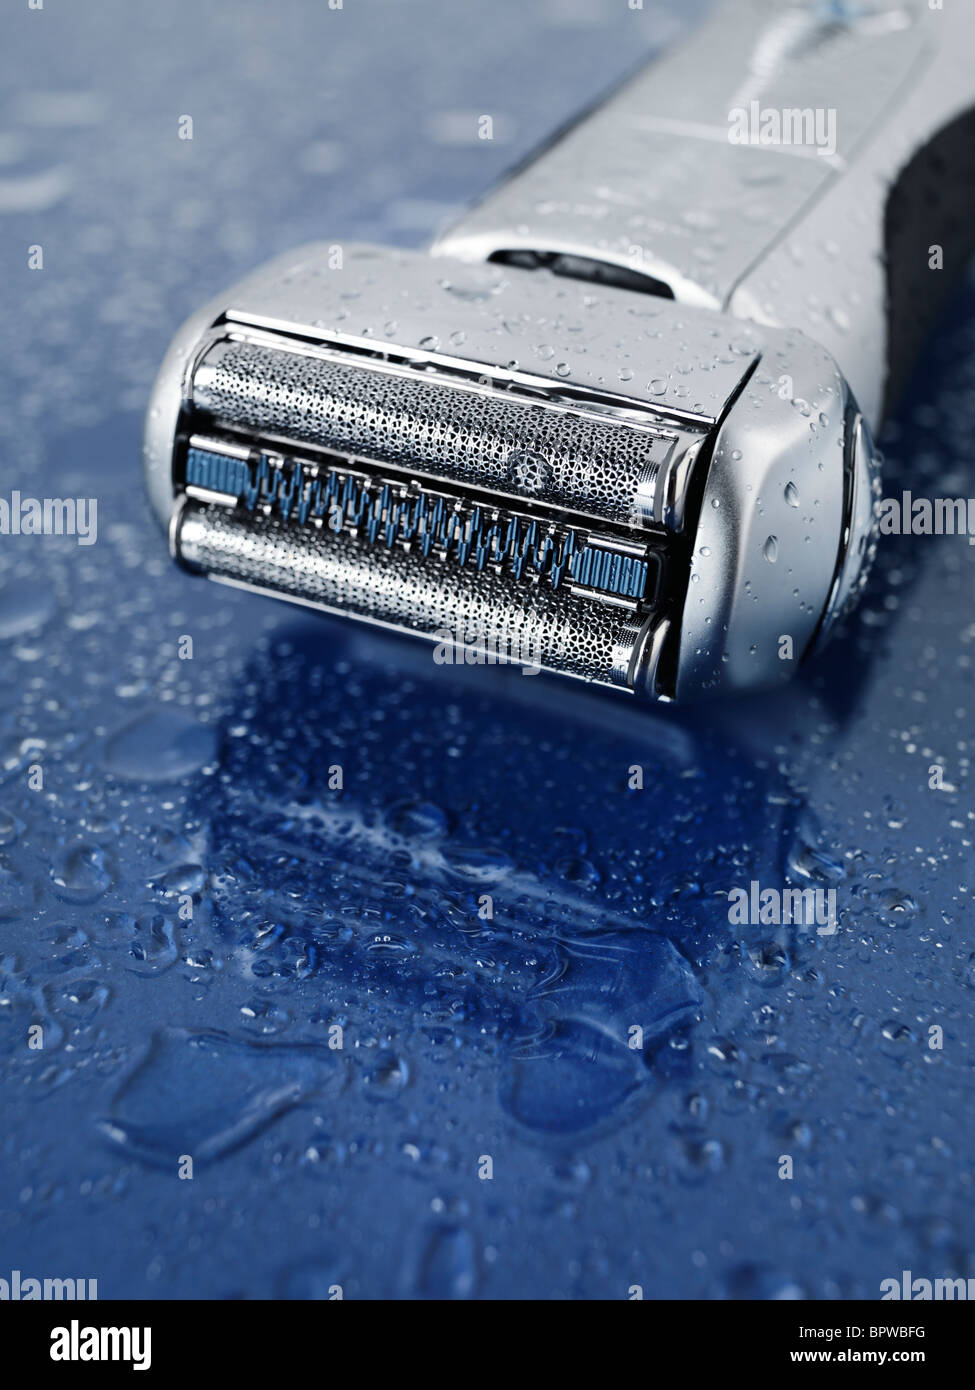 Braun 790CC - 9595 Pulsonic electric shaver on wet blue glass background with water drops on it Stock Photo